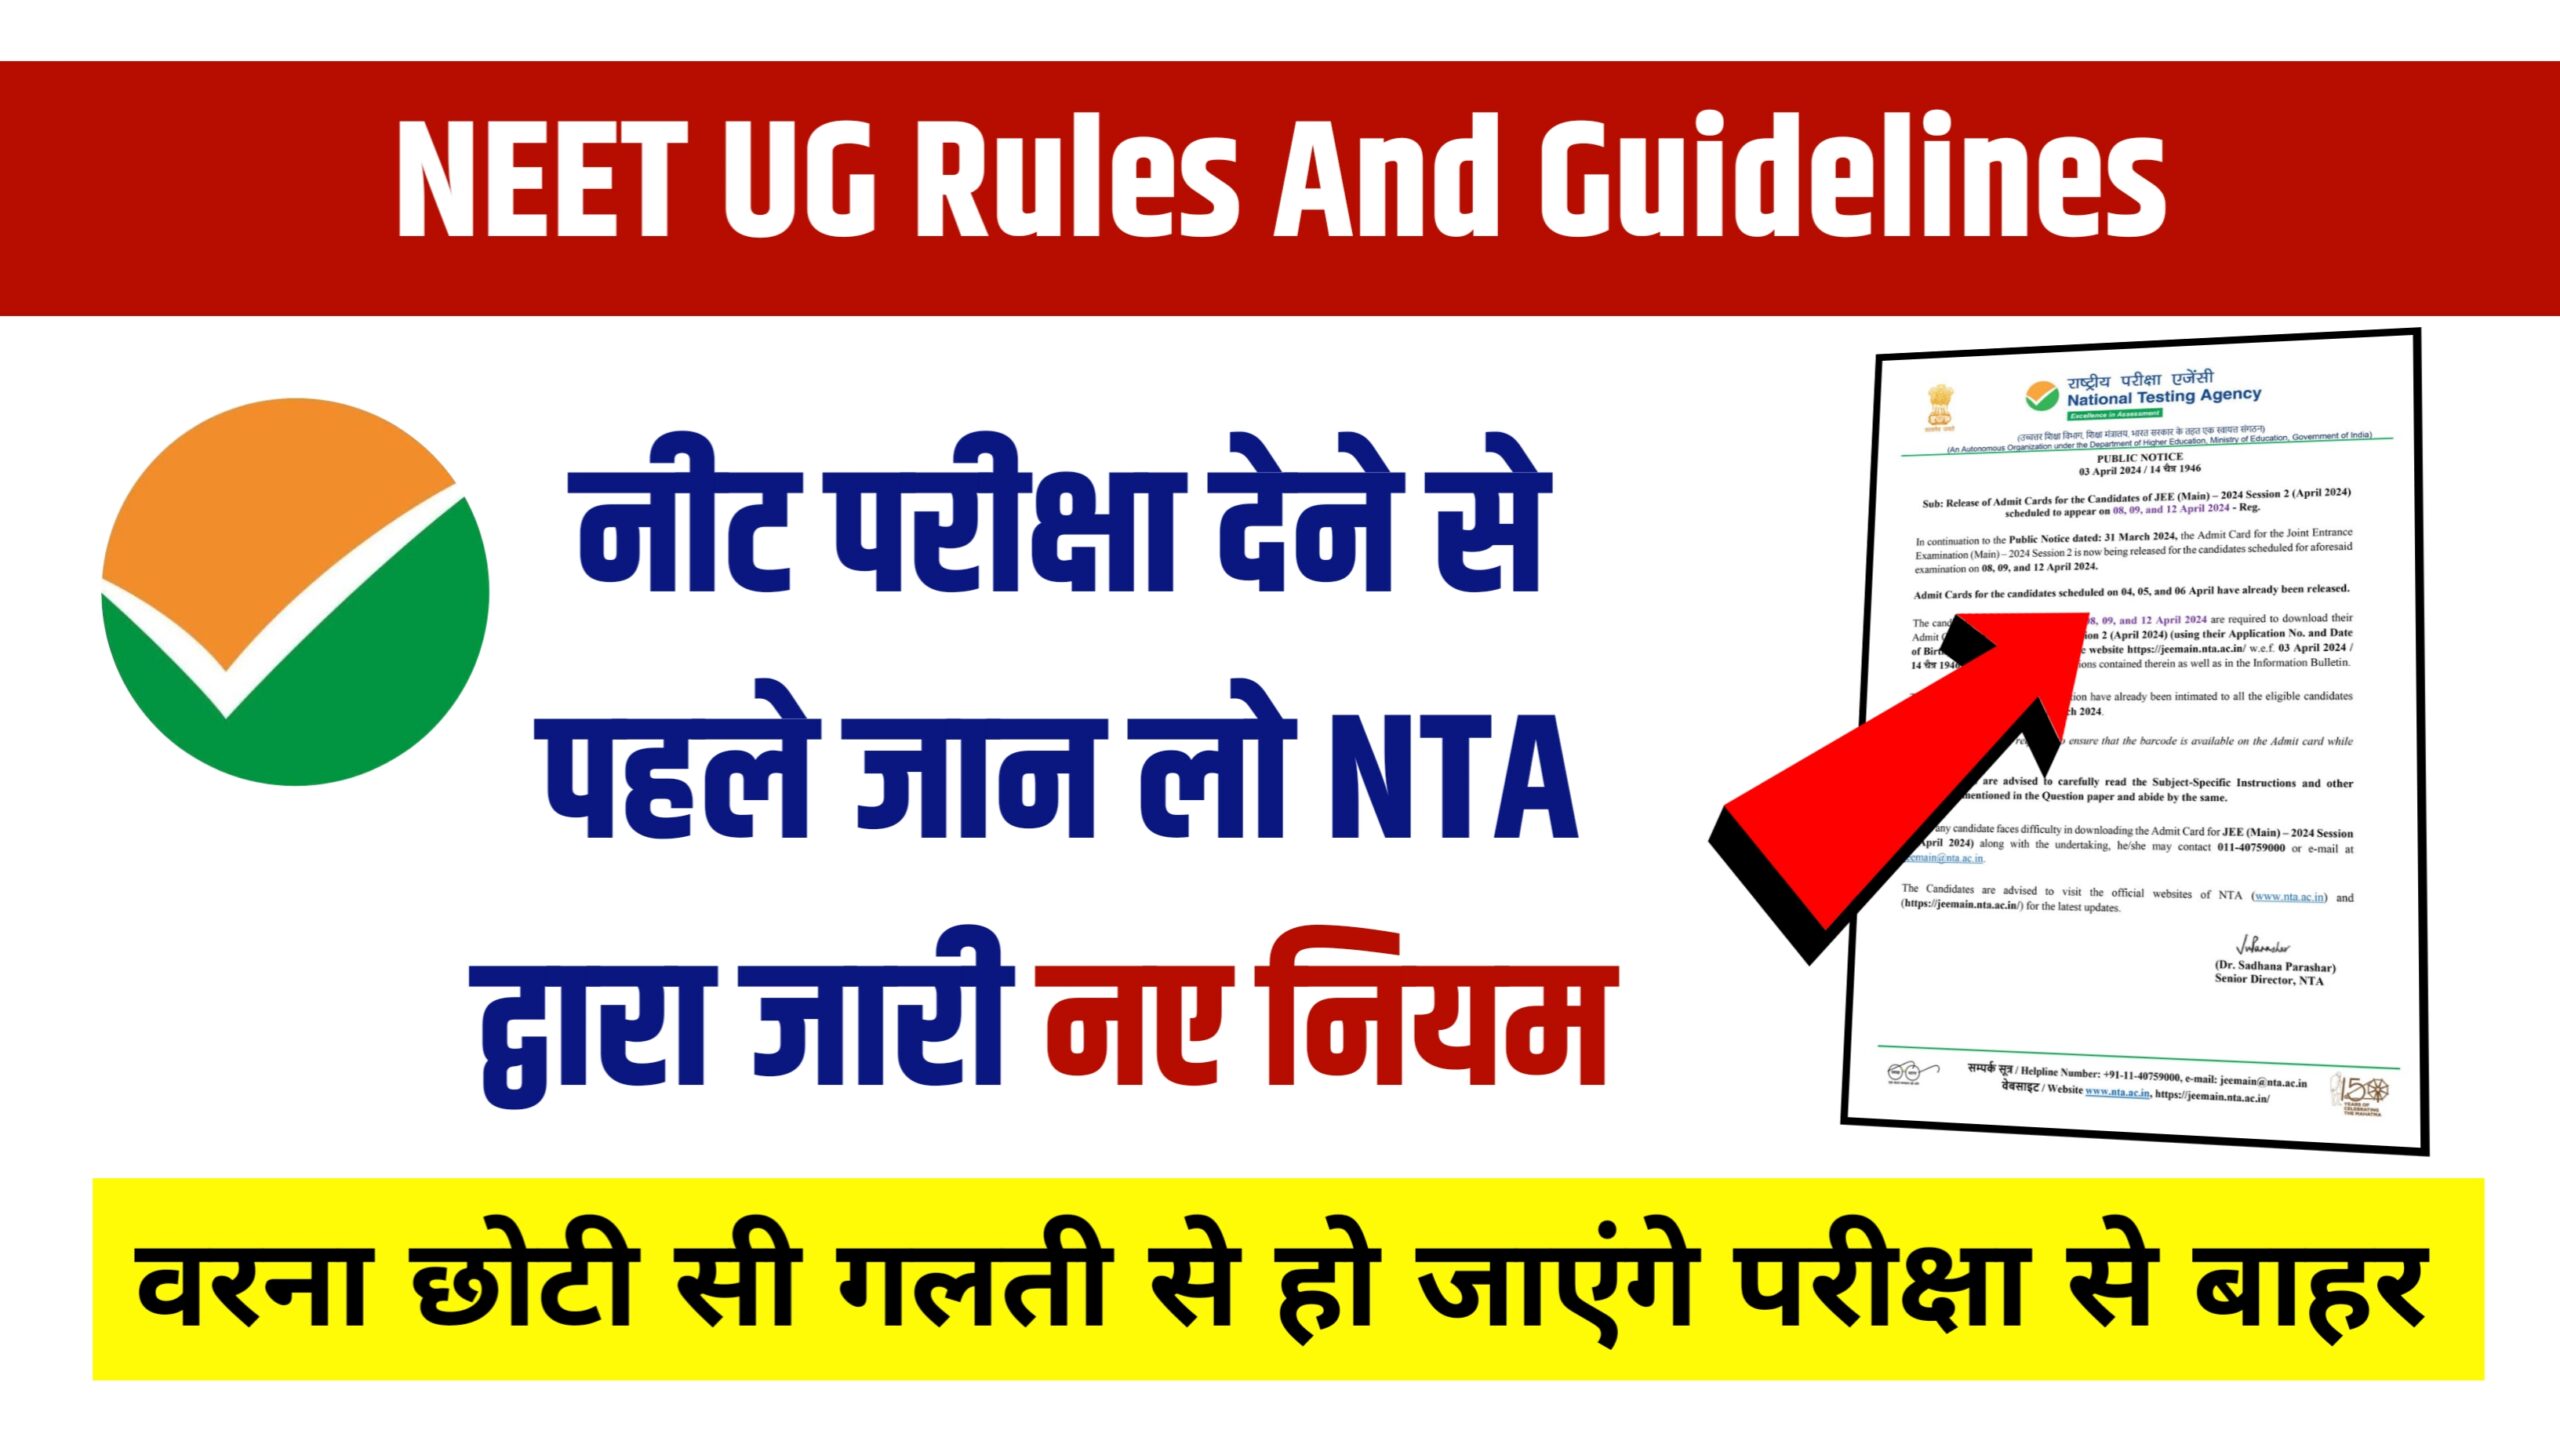 NEET UG Rules And Guidelines